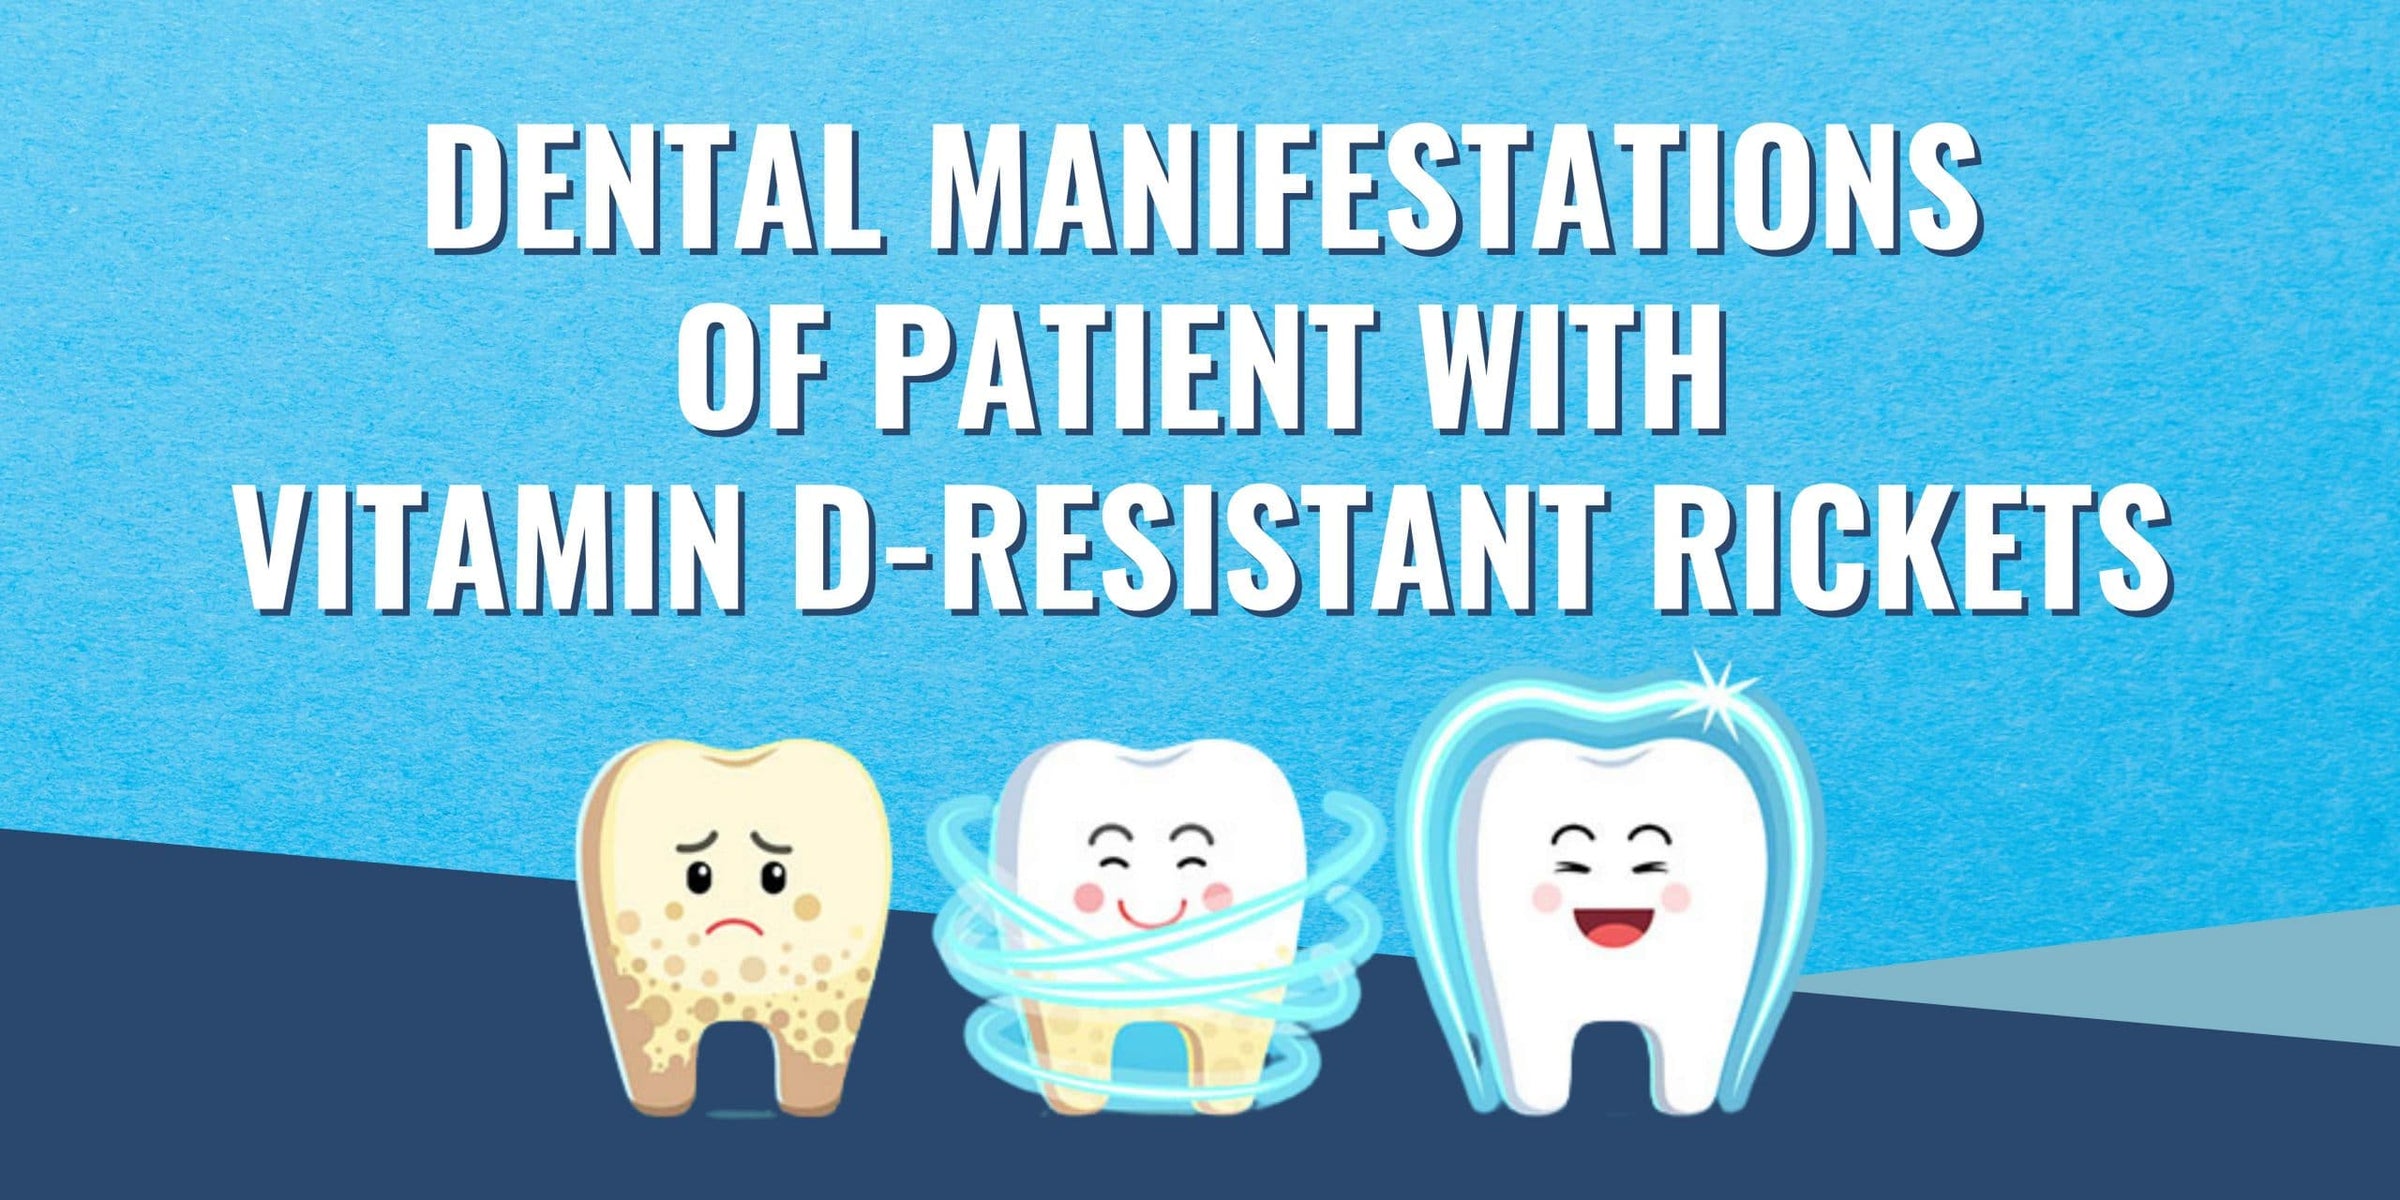 Dental manifestations of patient with Vitamin D-resistant rickets Image